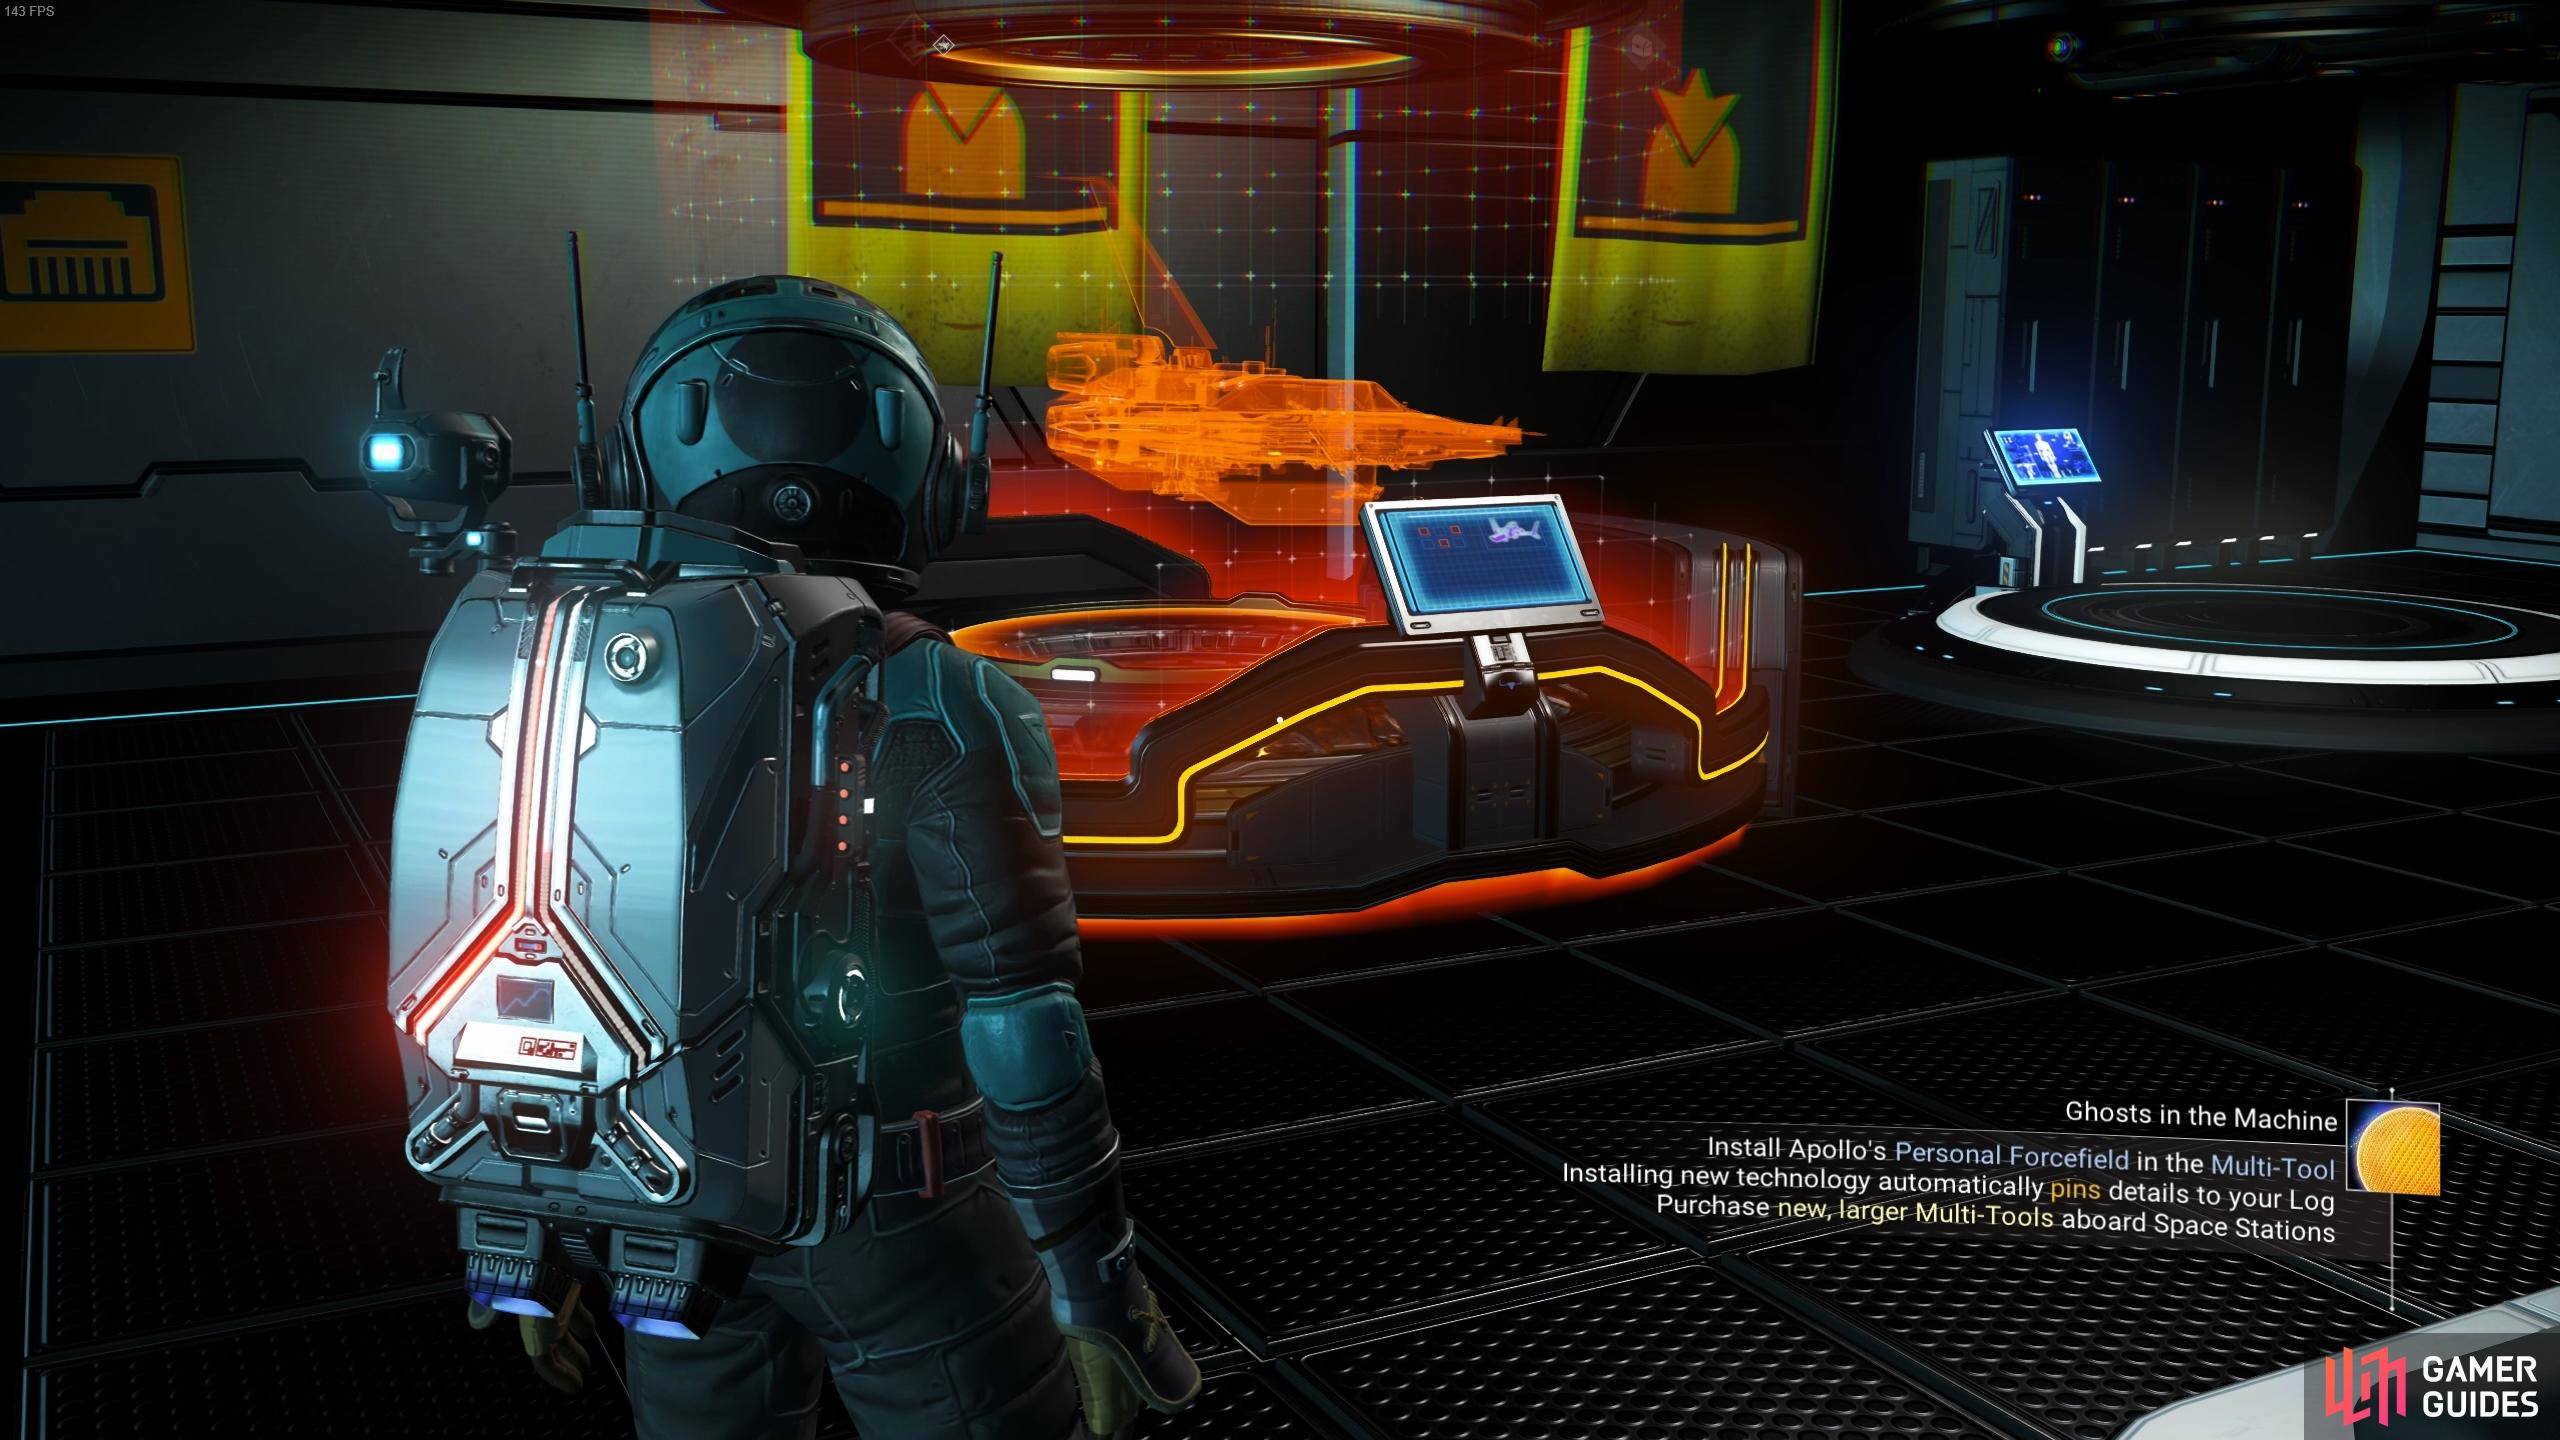 You can customize your appearance and modify your Starship here at the space station.